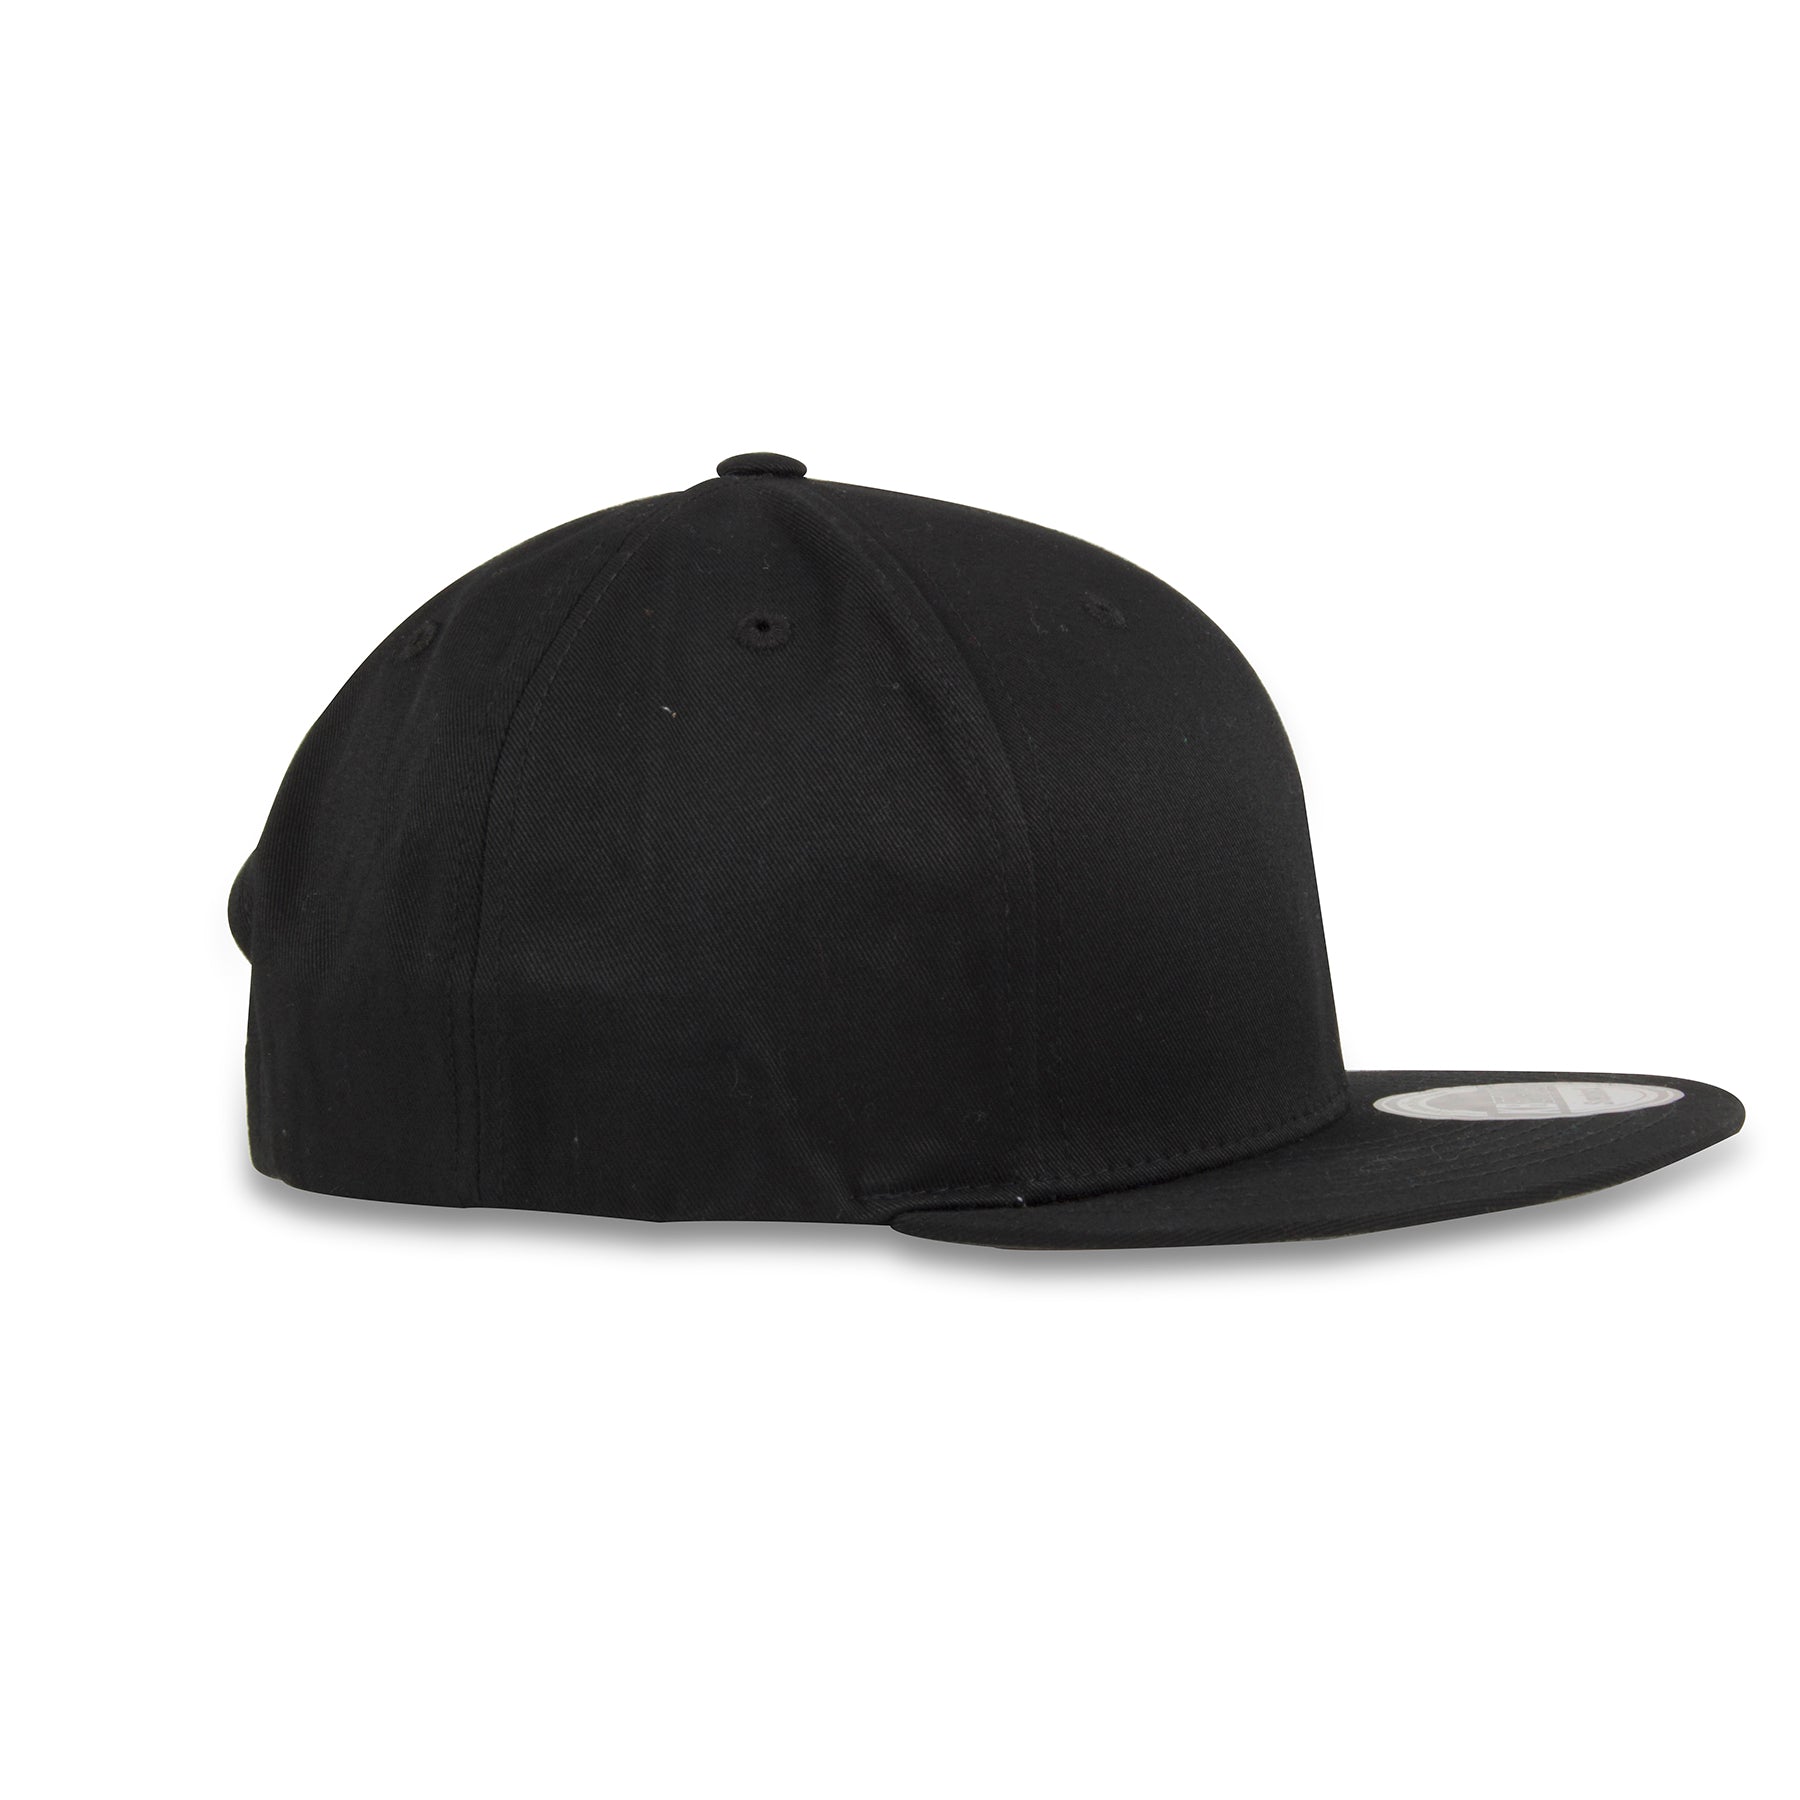 The blank black adjustable snapback hat is solid black with no embroidery